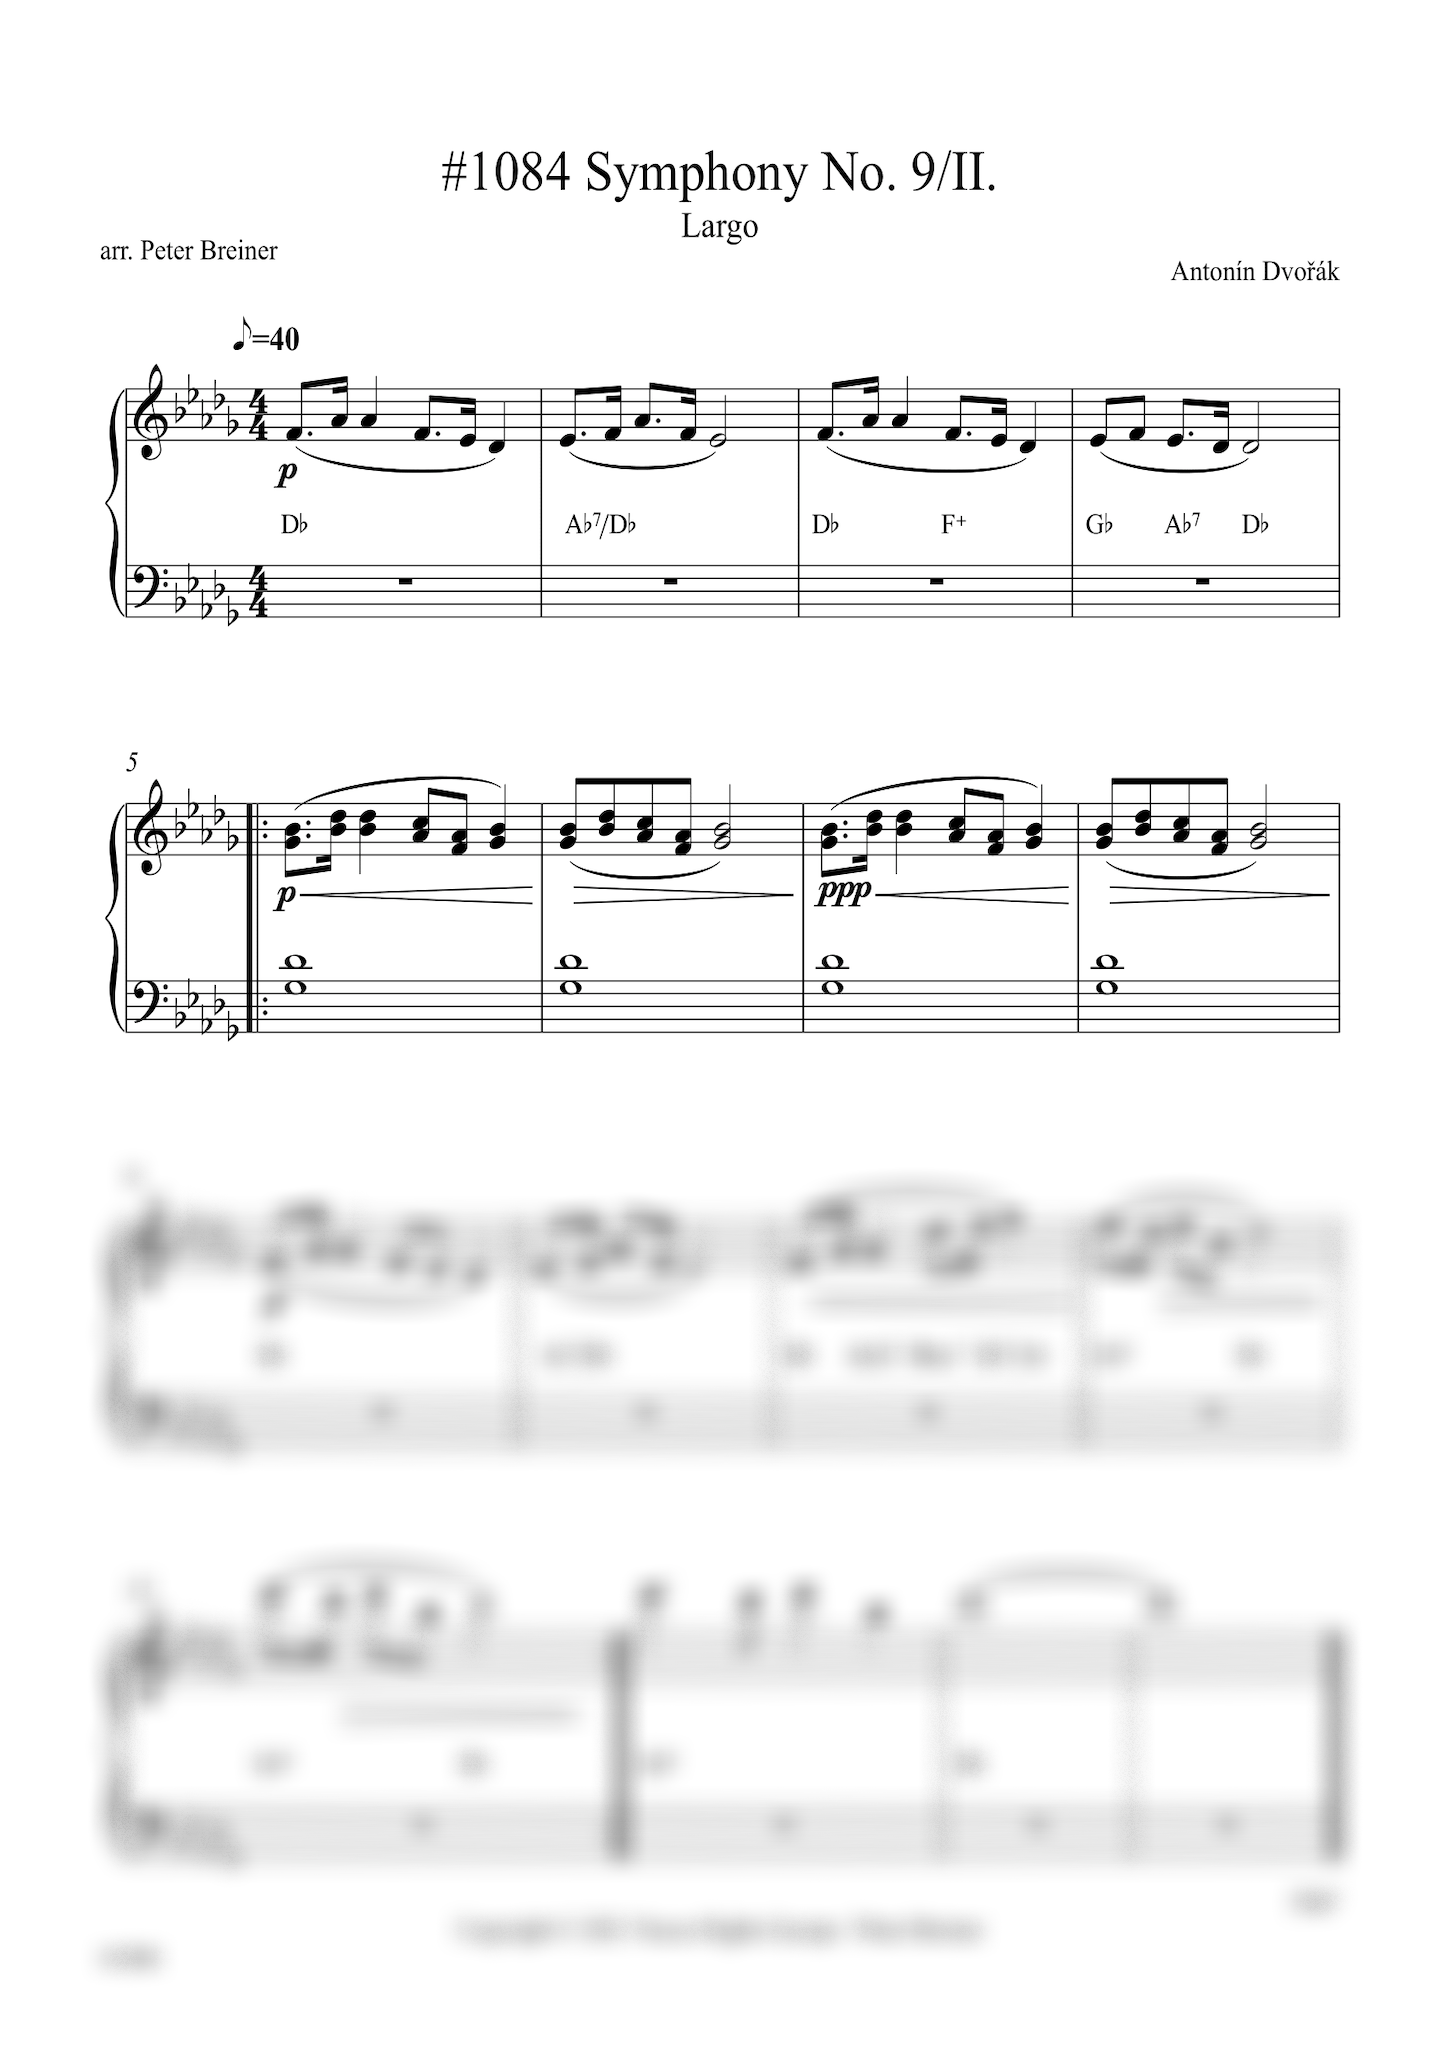 (From　in　for　piano　No.　New　the　Largo　minor　World)　Symphony　from　Dvořák:　E